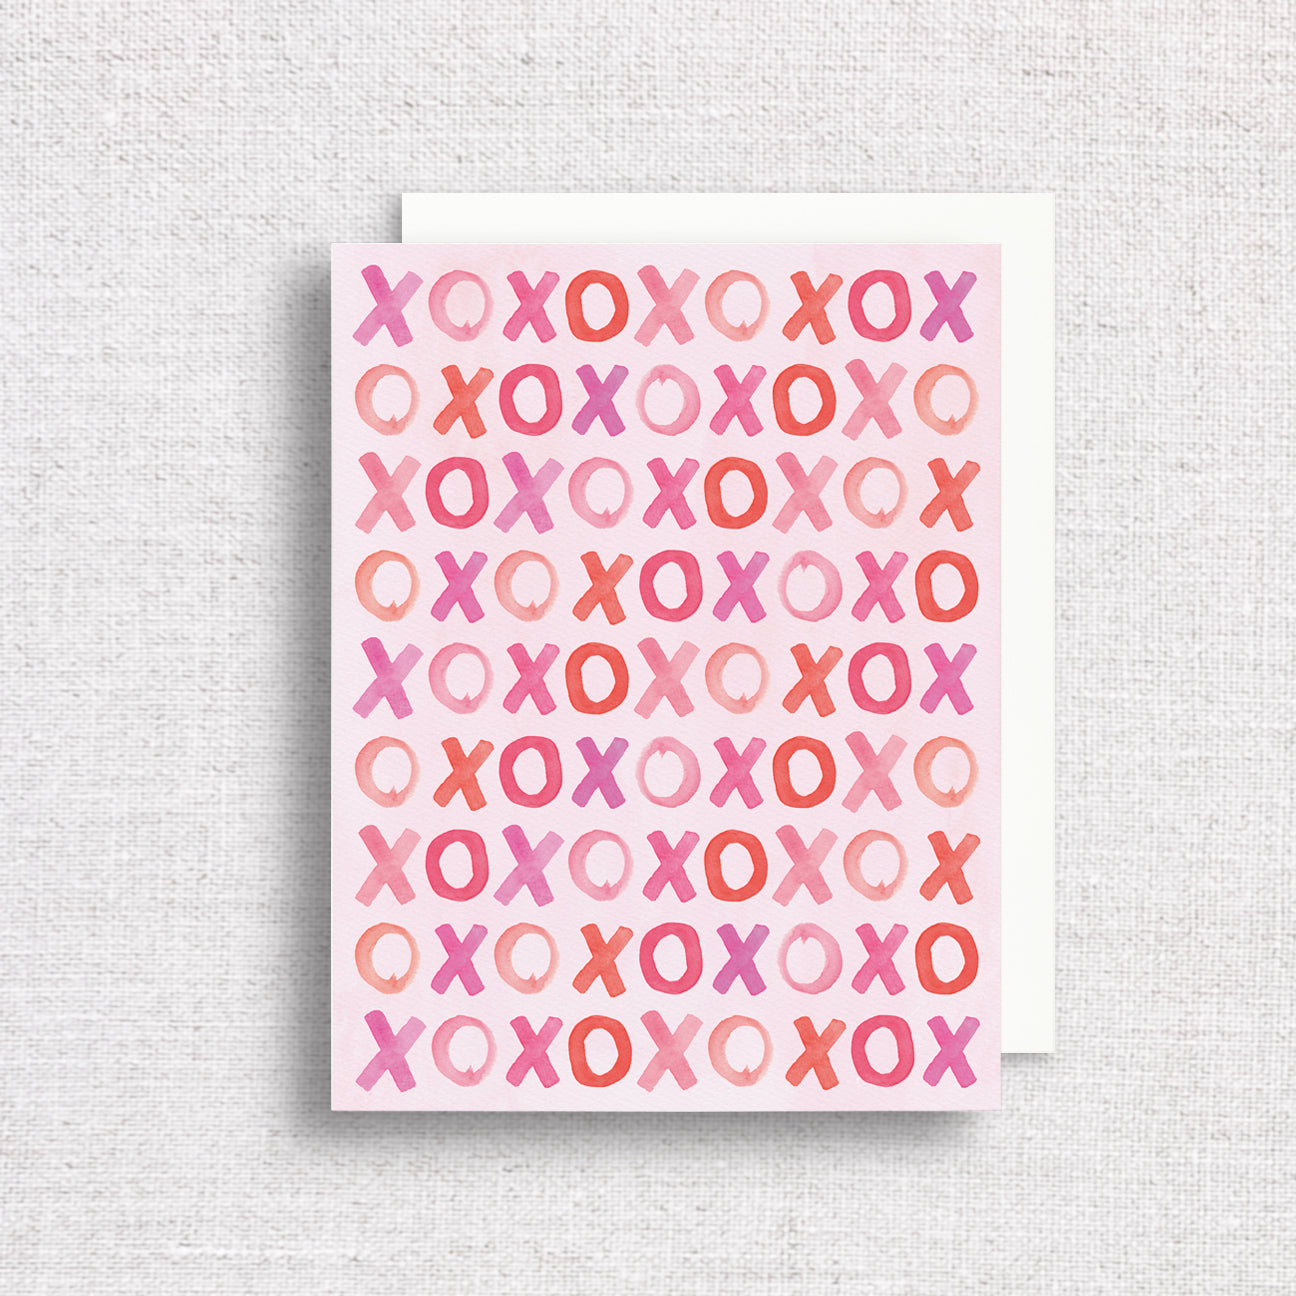 X's and O's Greeting Card by Gert & Co